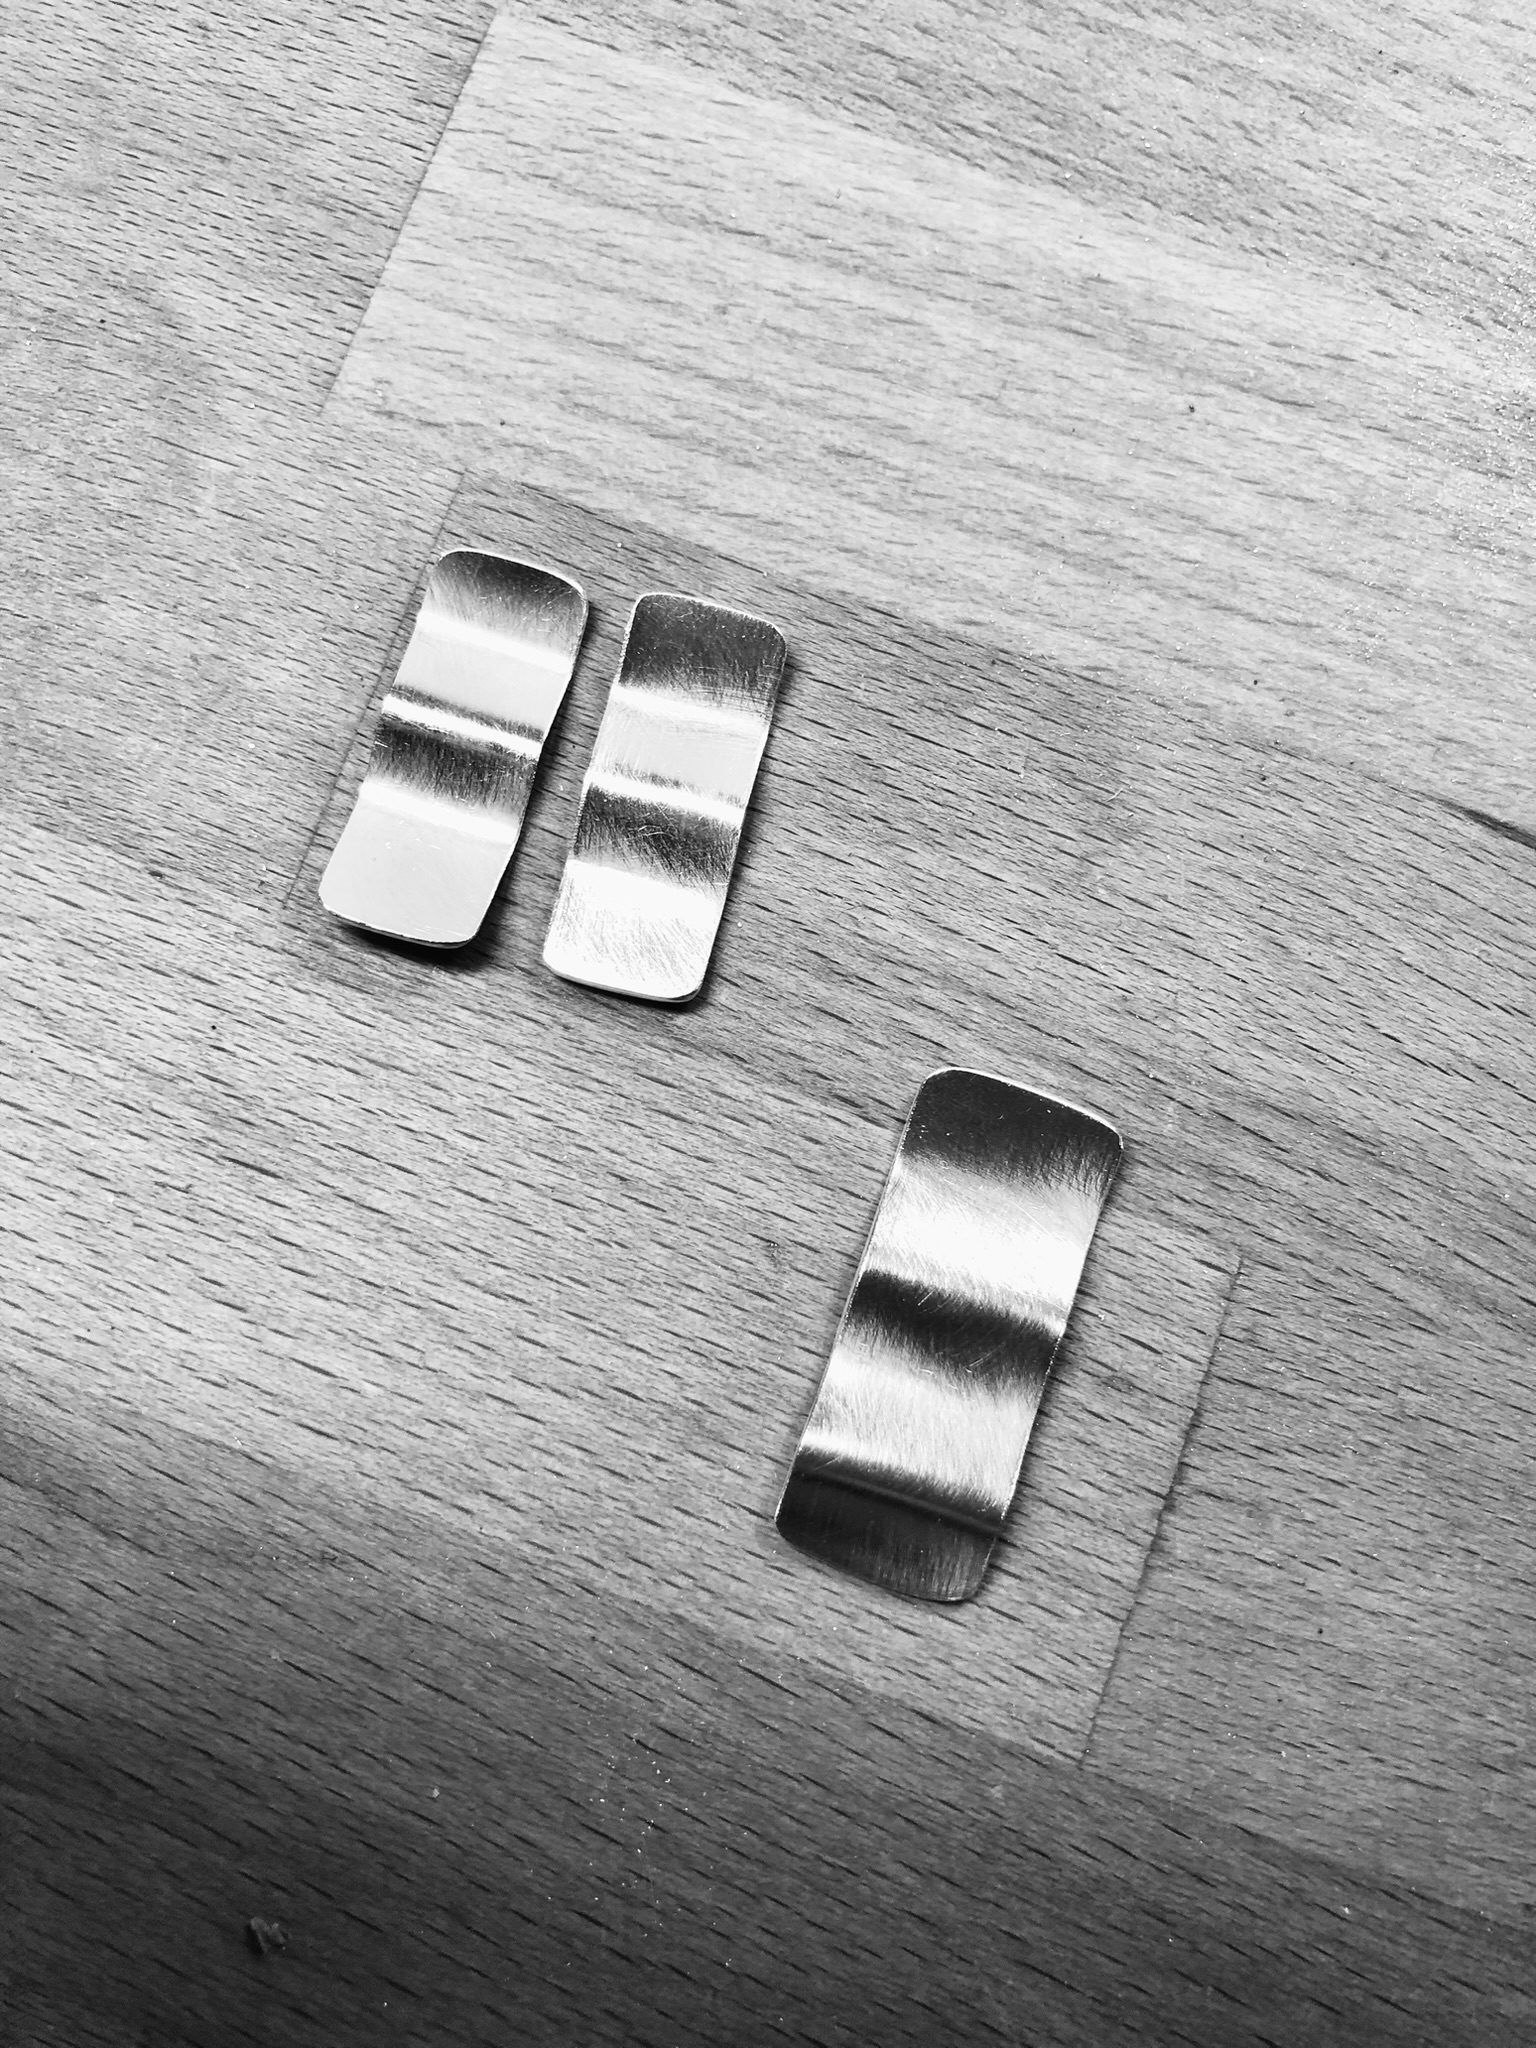 A silverring and a pair of earrings shaped as wavy rectangles.